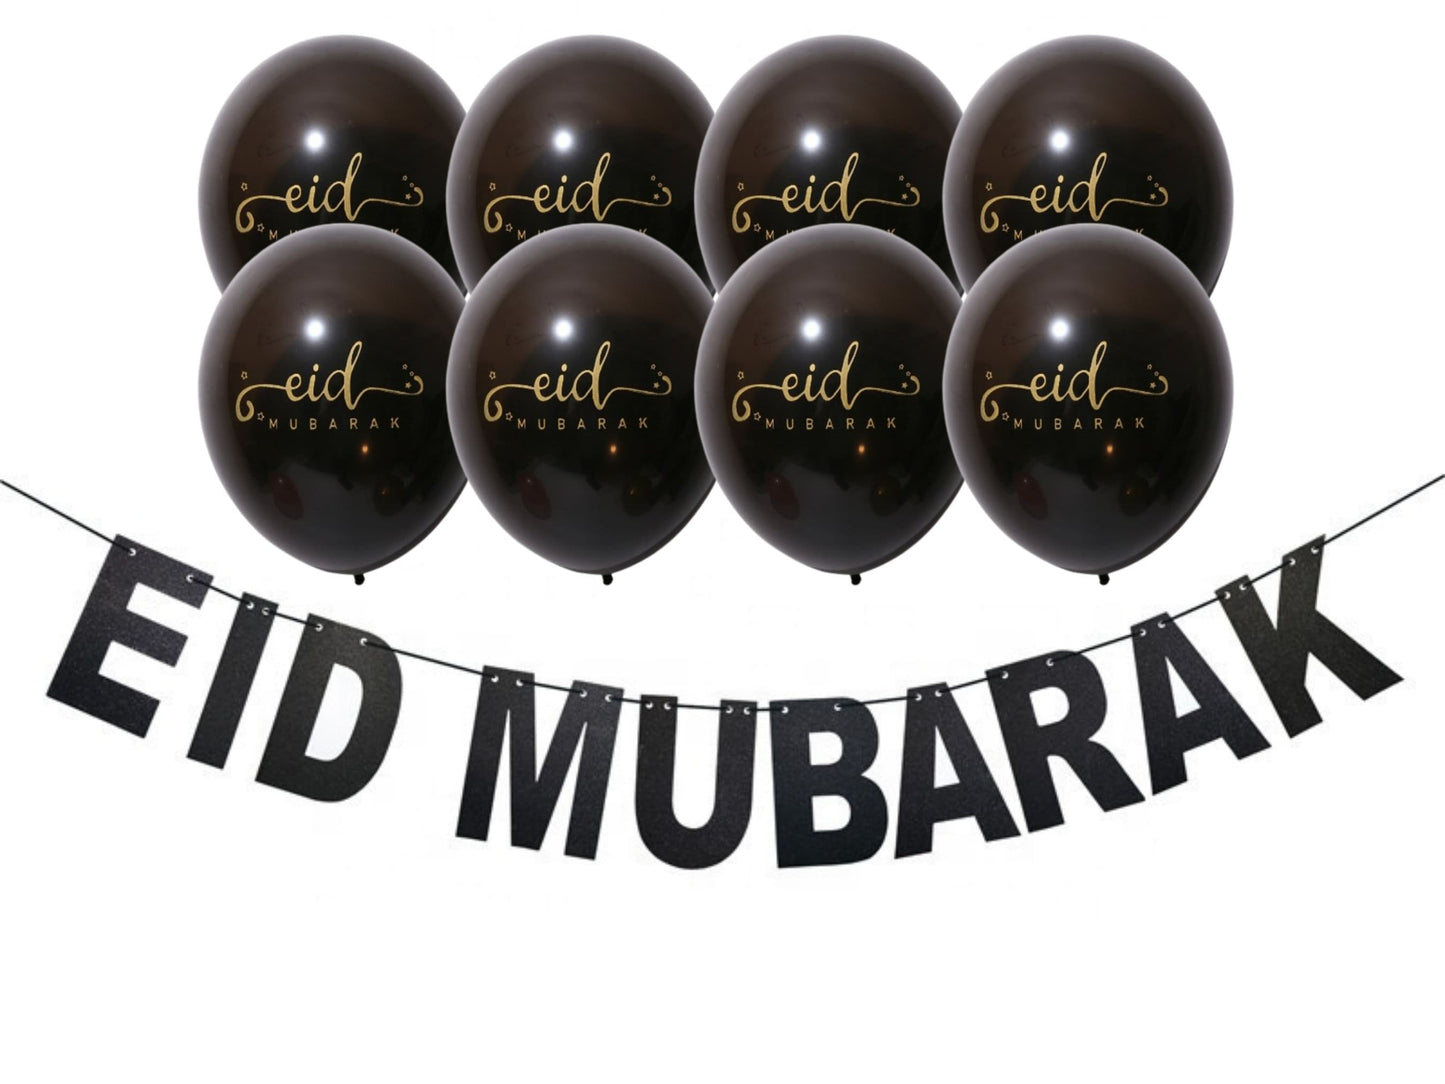 Black Eid Banner and 10 inch Balloons, Eid Mubarak Bunting and Balloon set for Eid party celebration.